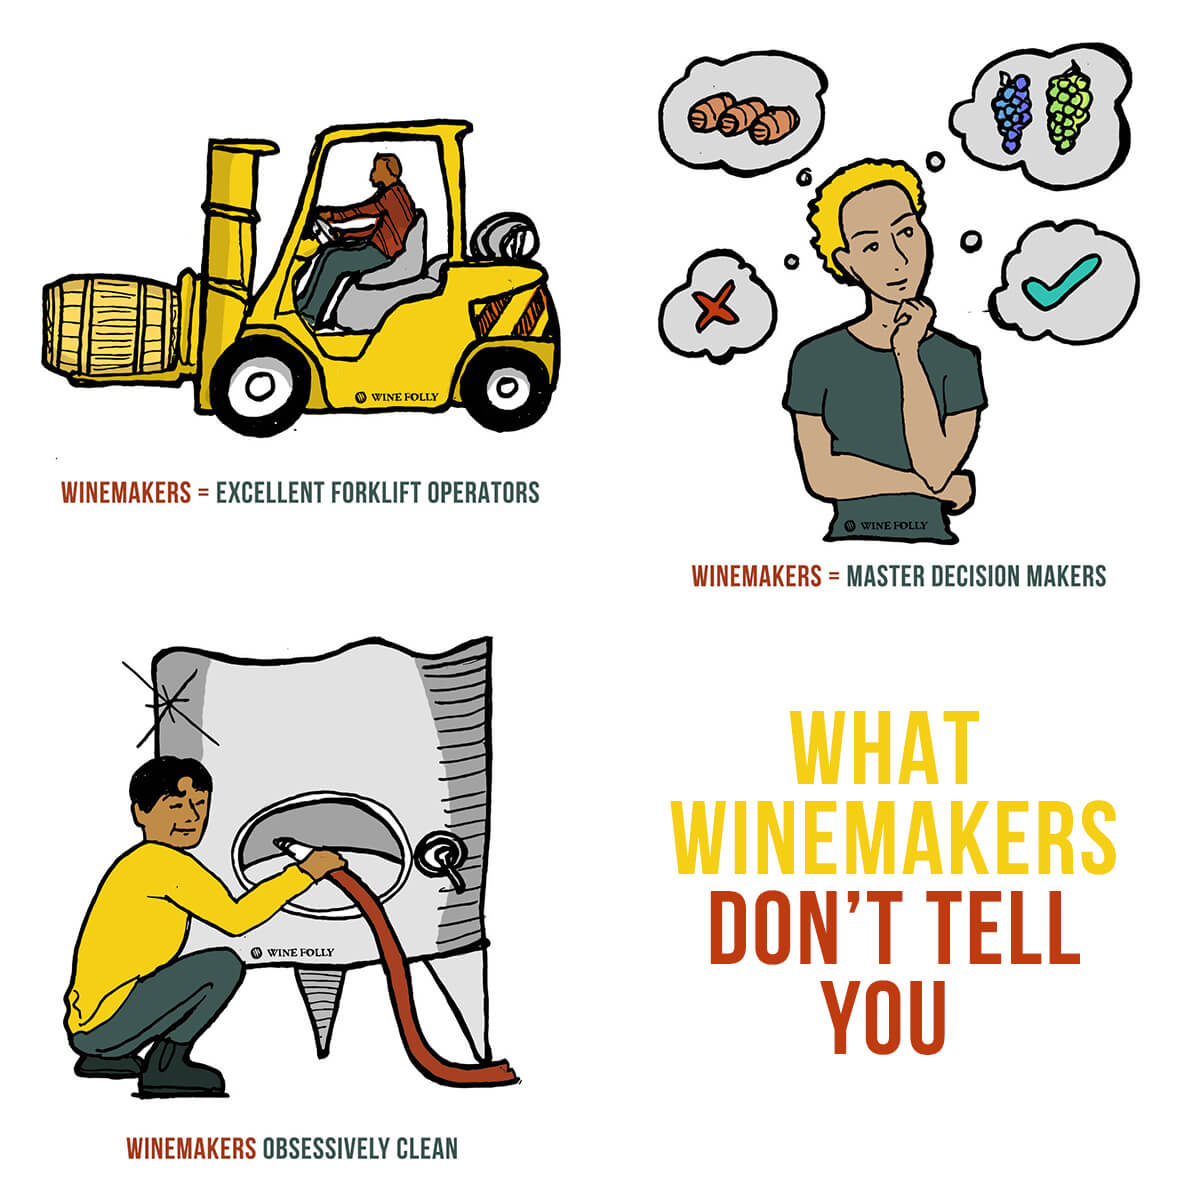 What winemakers don't tell you about the job illustration by Wine Folly